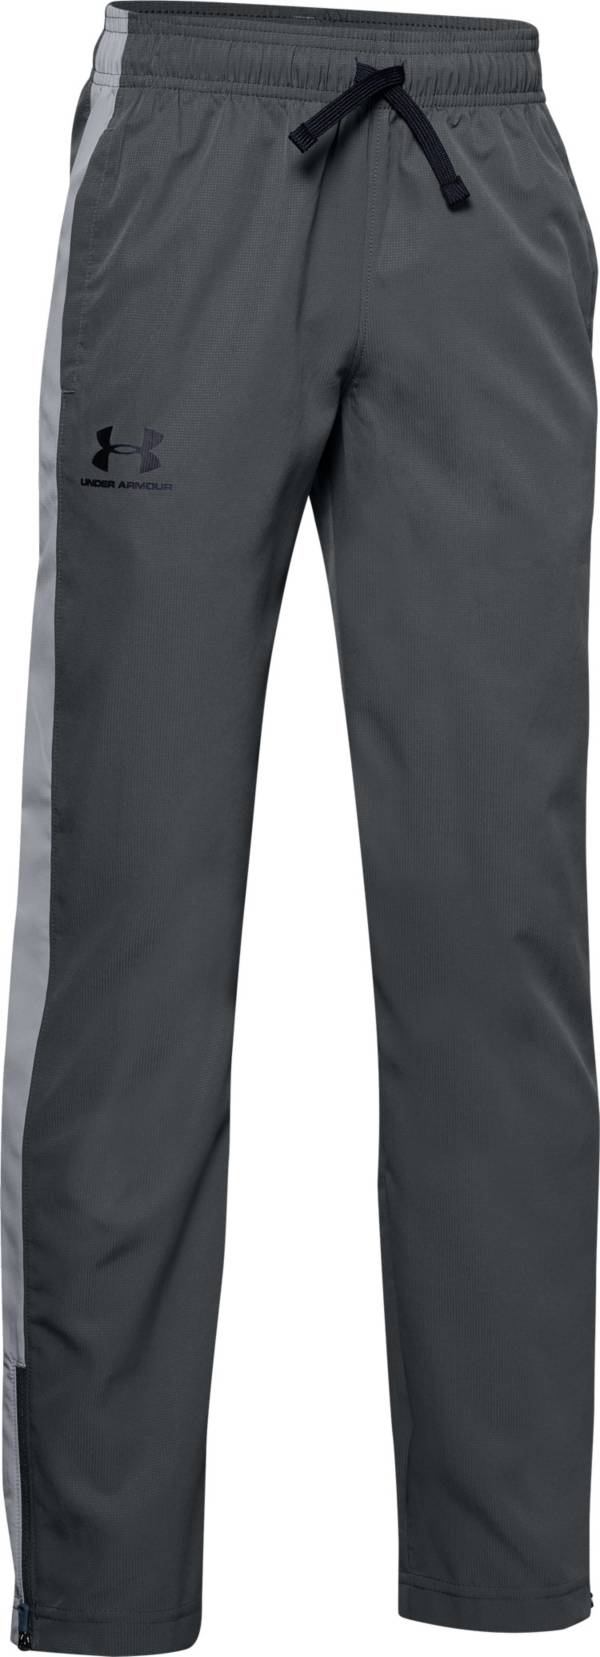 Under Armour Boys' Woven Training Track Pants 